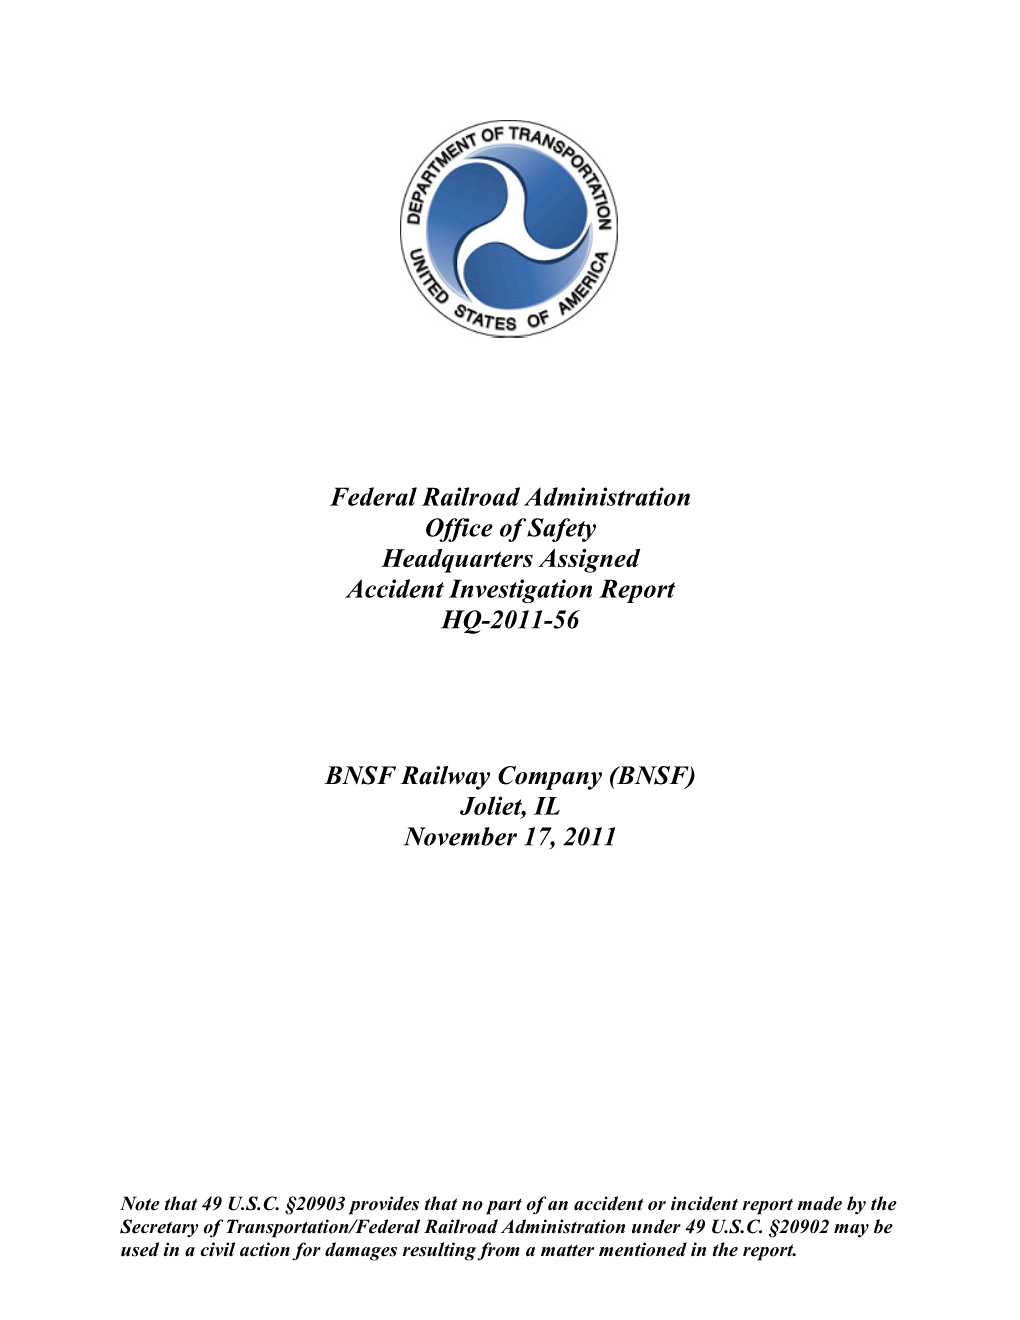 Federal Railroad Administration Office of Safety Headquarters Assigned Accident Investigation Report HQ-2011-56